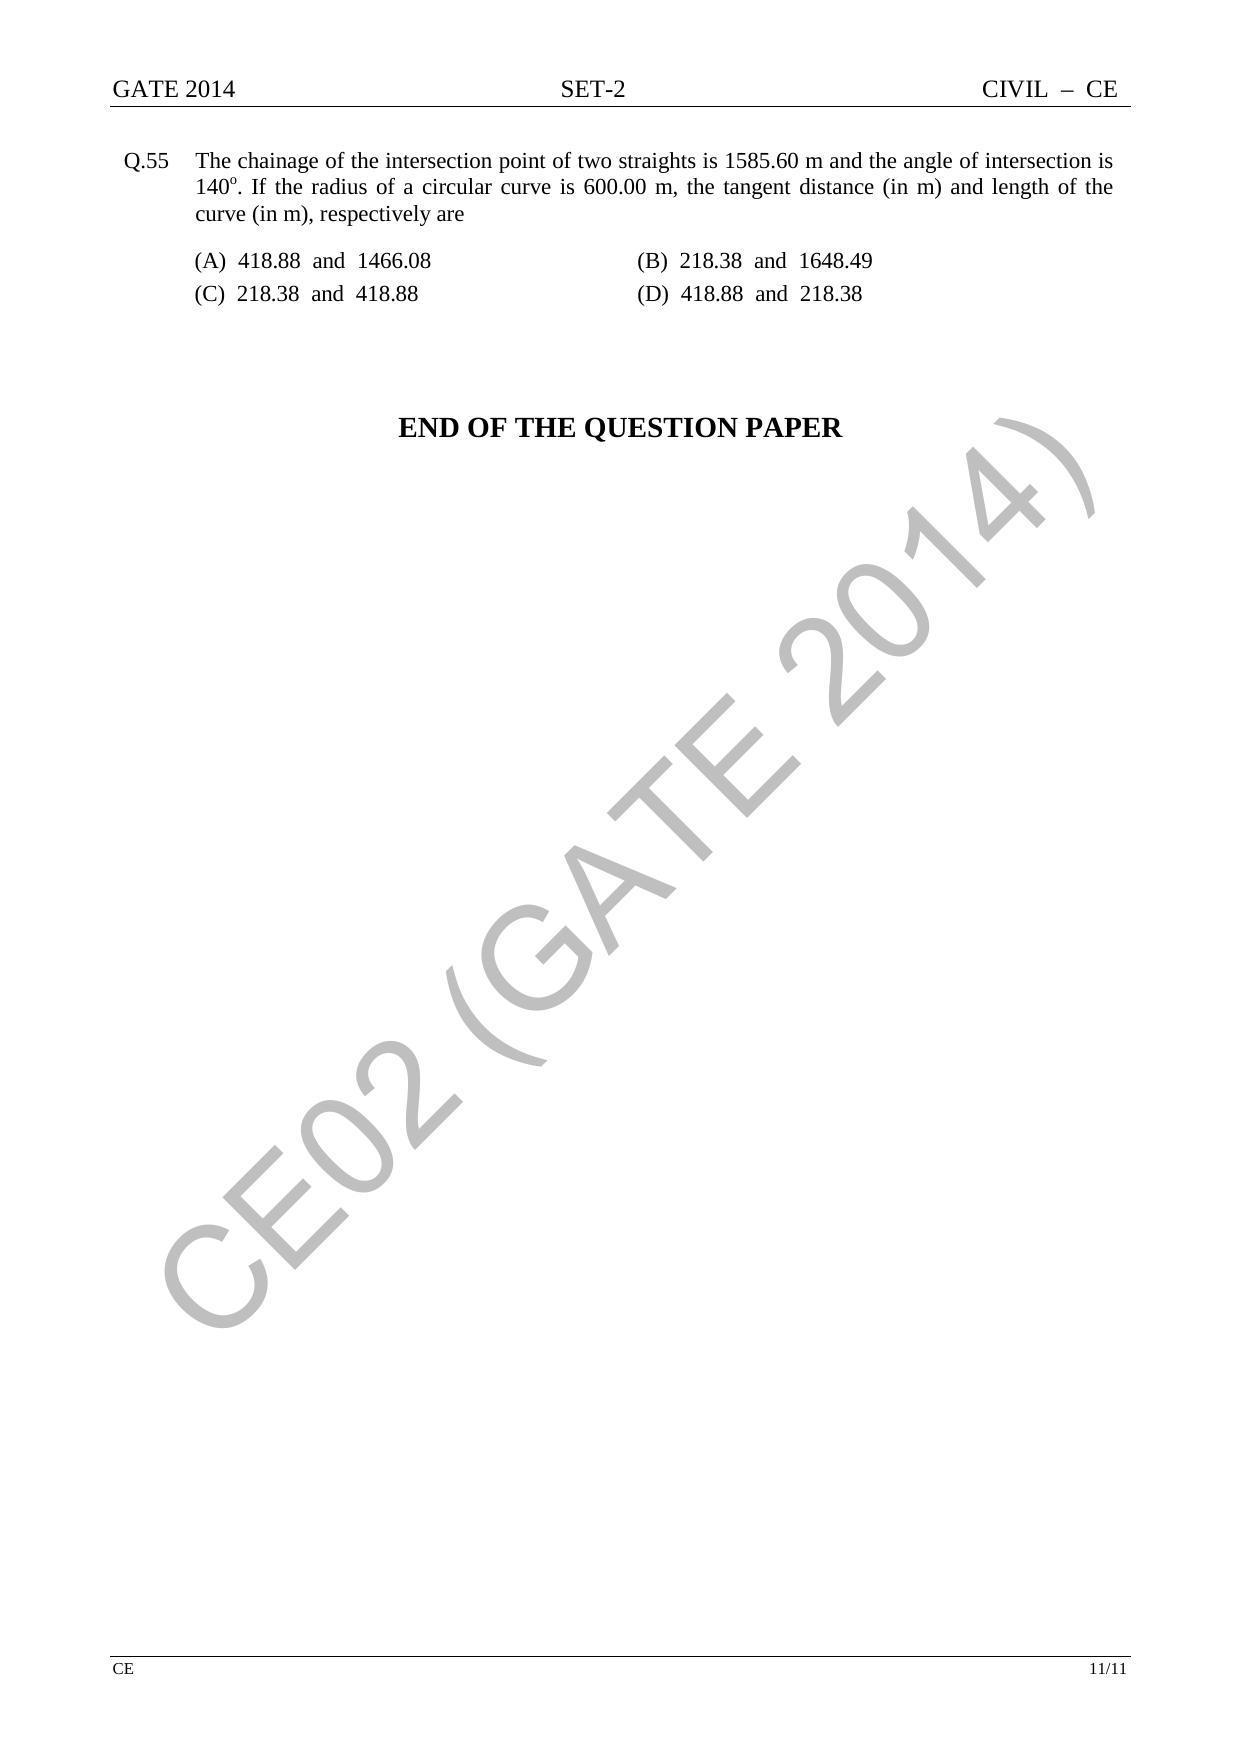 GATE 2014 Civil Engineering (CE) Question Paper with Answer Key - Page 39